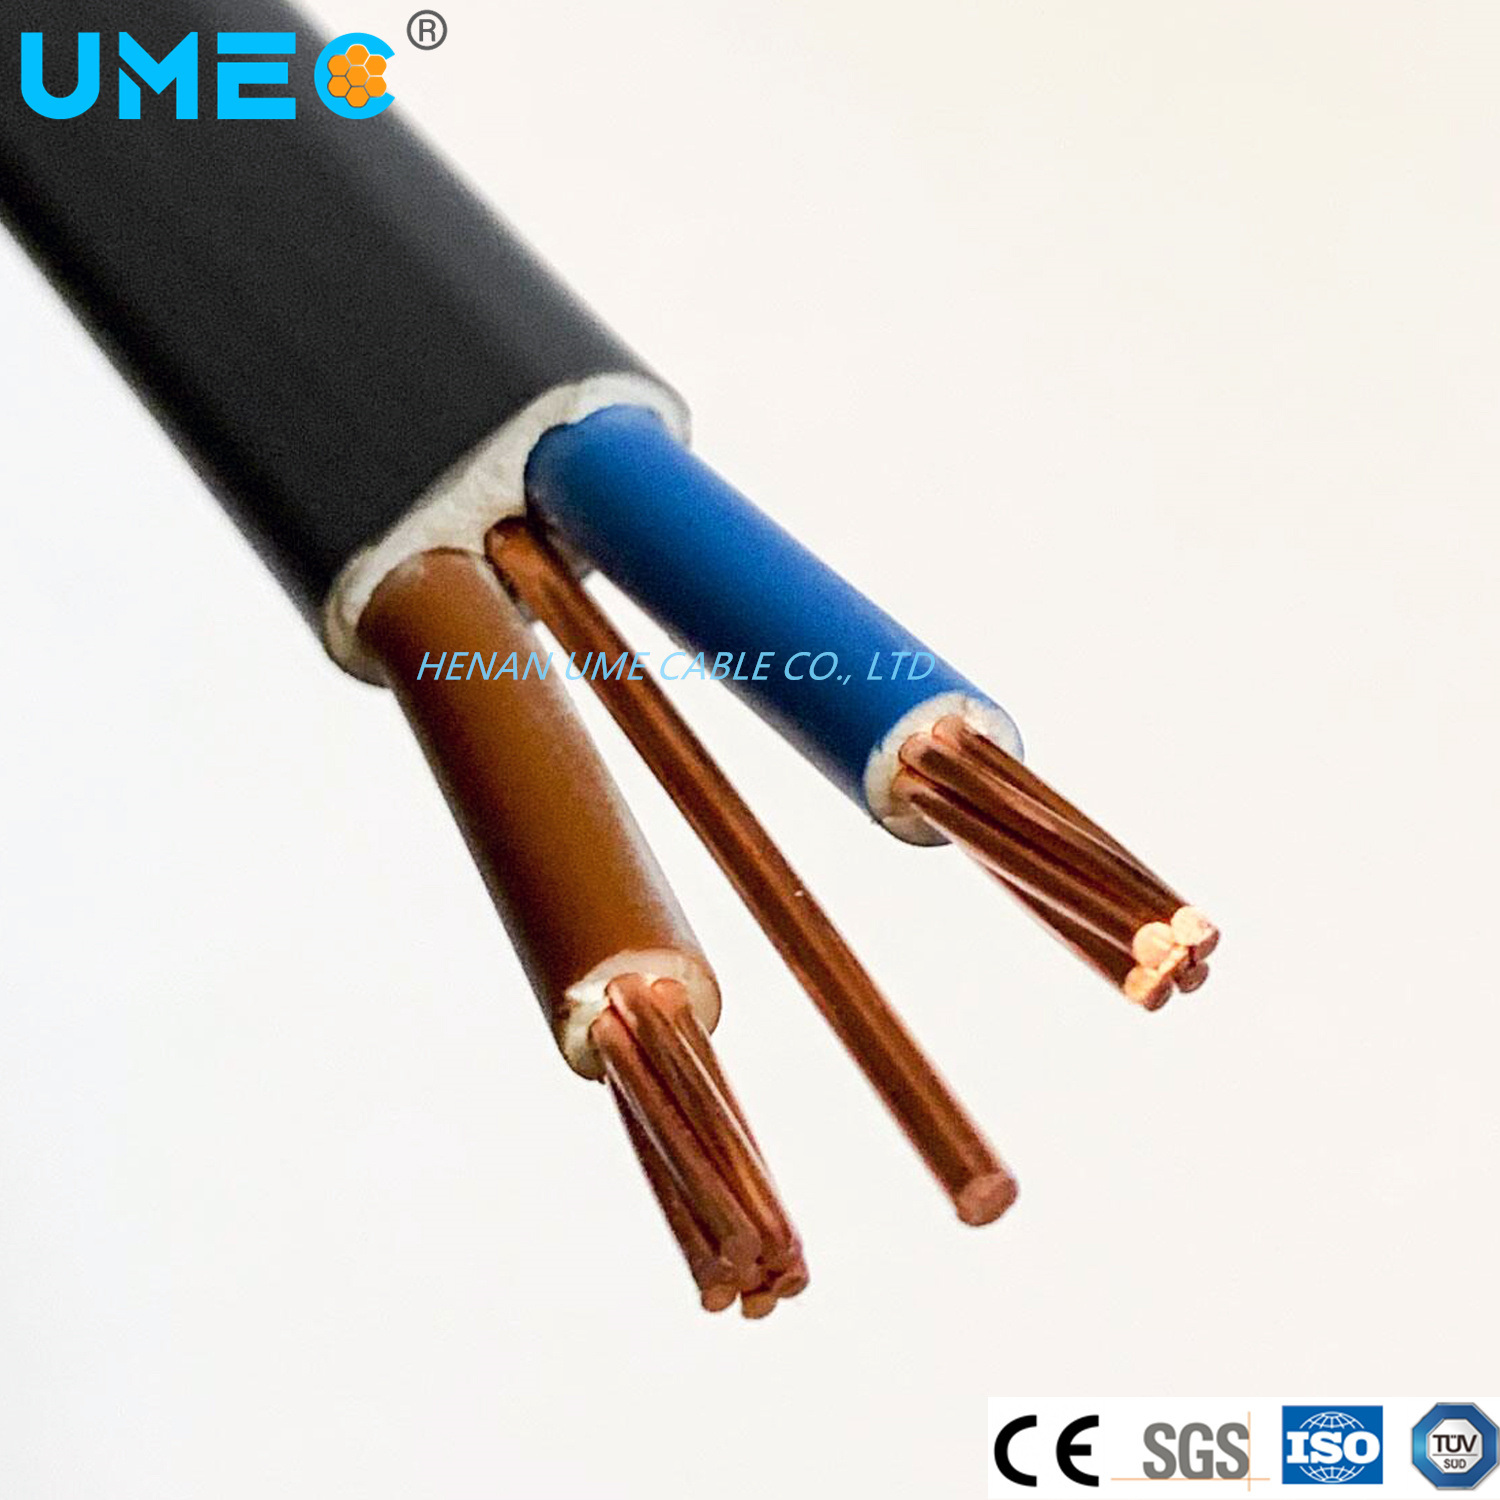 BS 6004 6mm2 Twin and Earth Flat Cable 2 Core Electrical Wire 2.5mm2 and 1.5mm2 Electric Cable